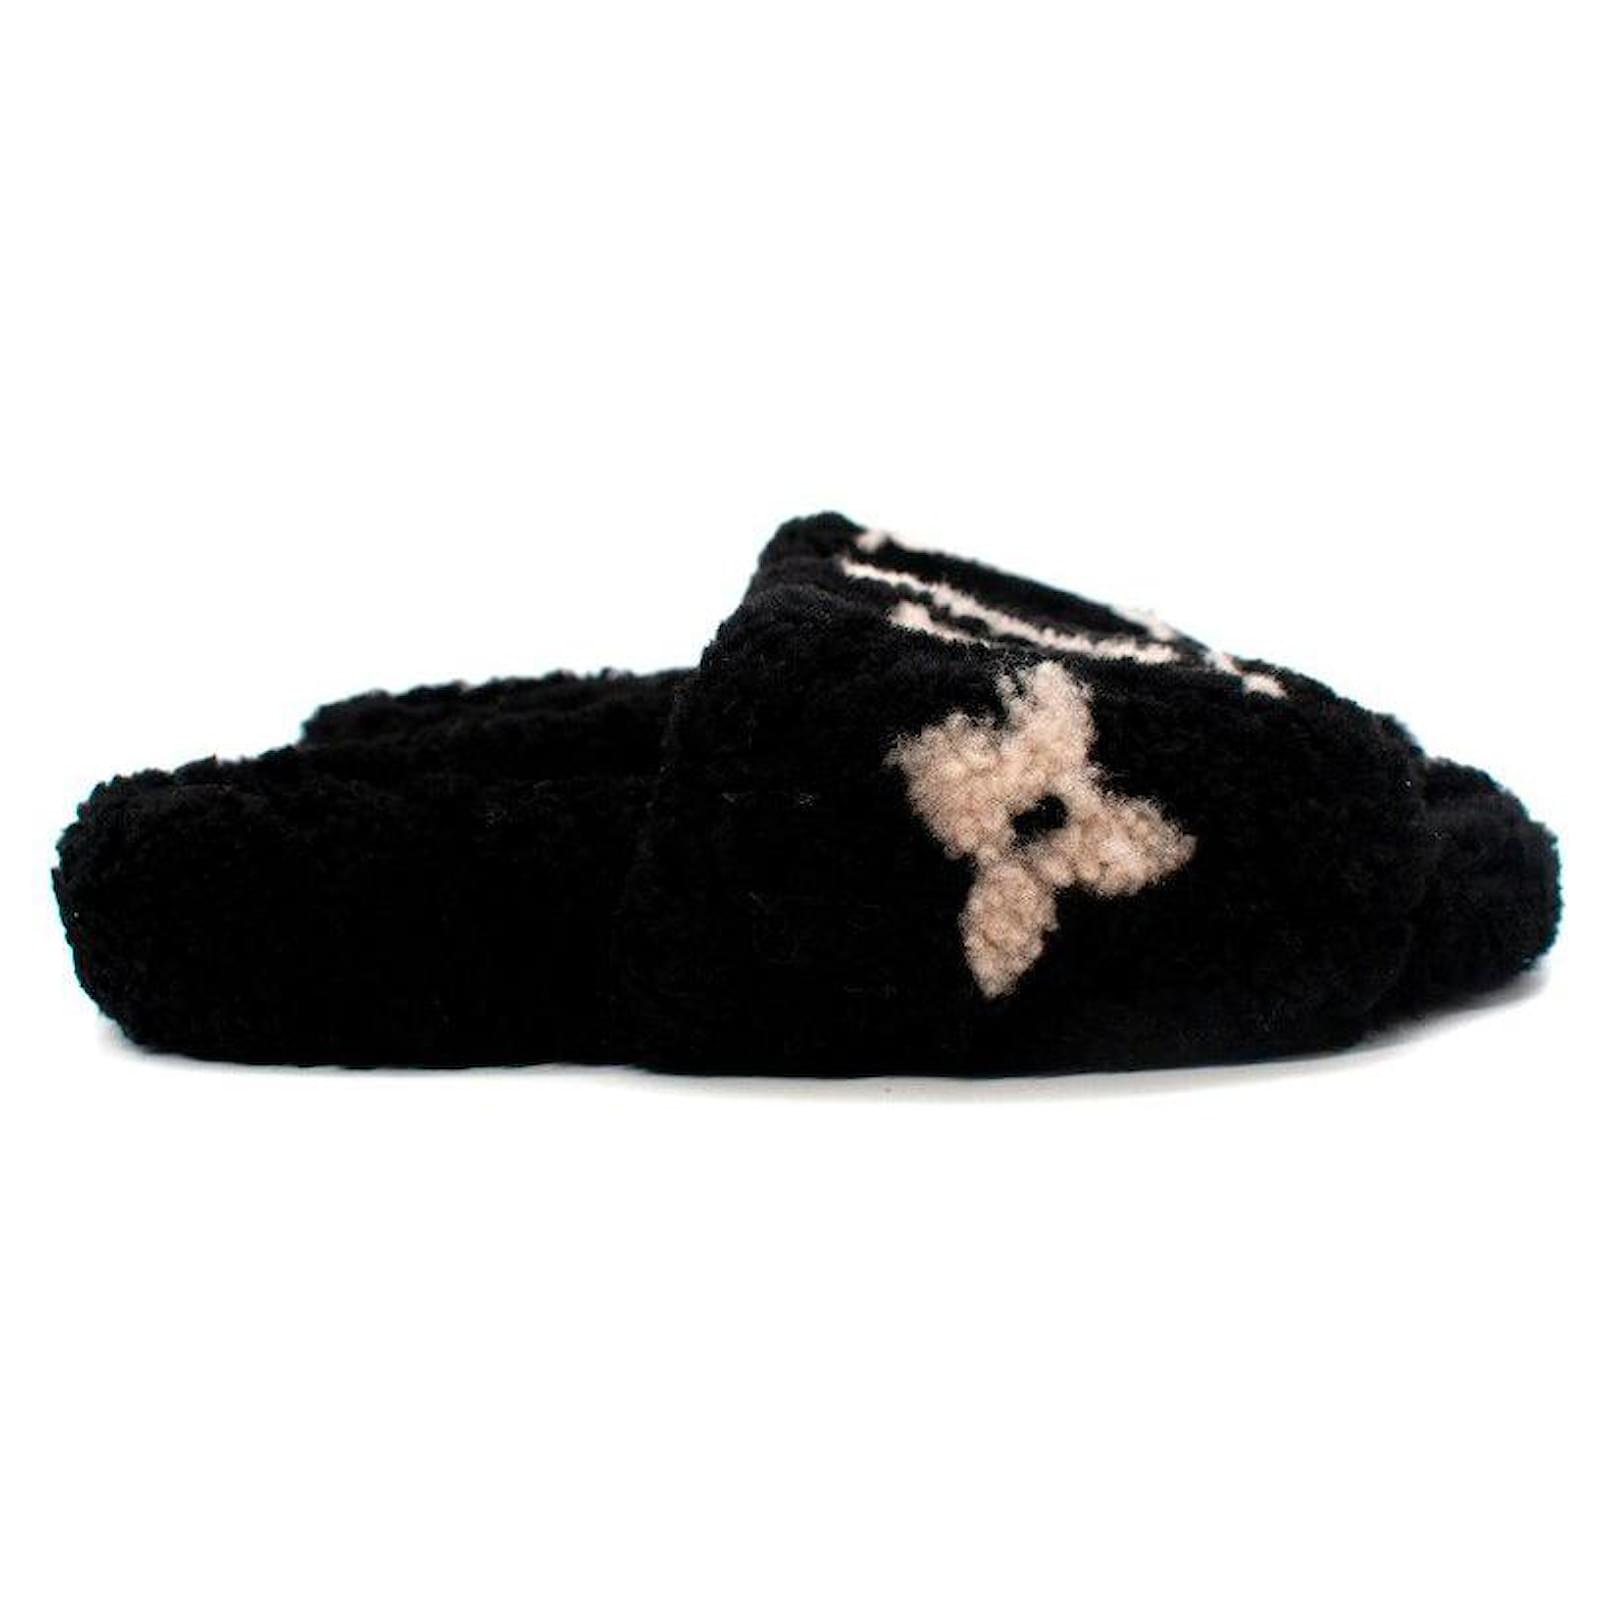 Louis Vuitton Bom Dia Shearling Black Flat Mules - Sold Out/Rare